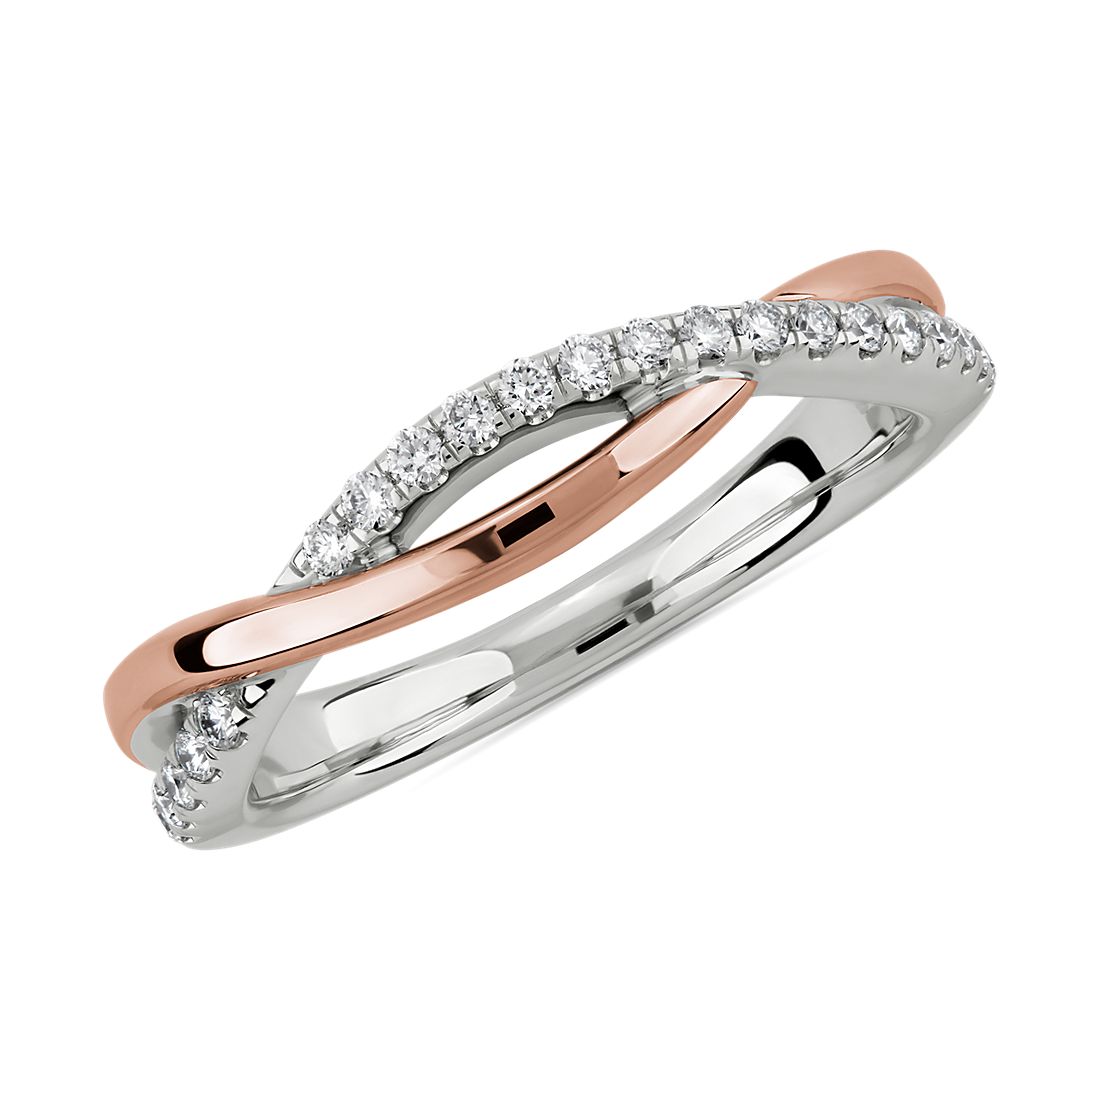 Two-Tone Twist Diamond Wedding Ring in 14k White and Rose Gold (1/6 ct. tw.)